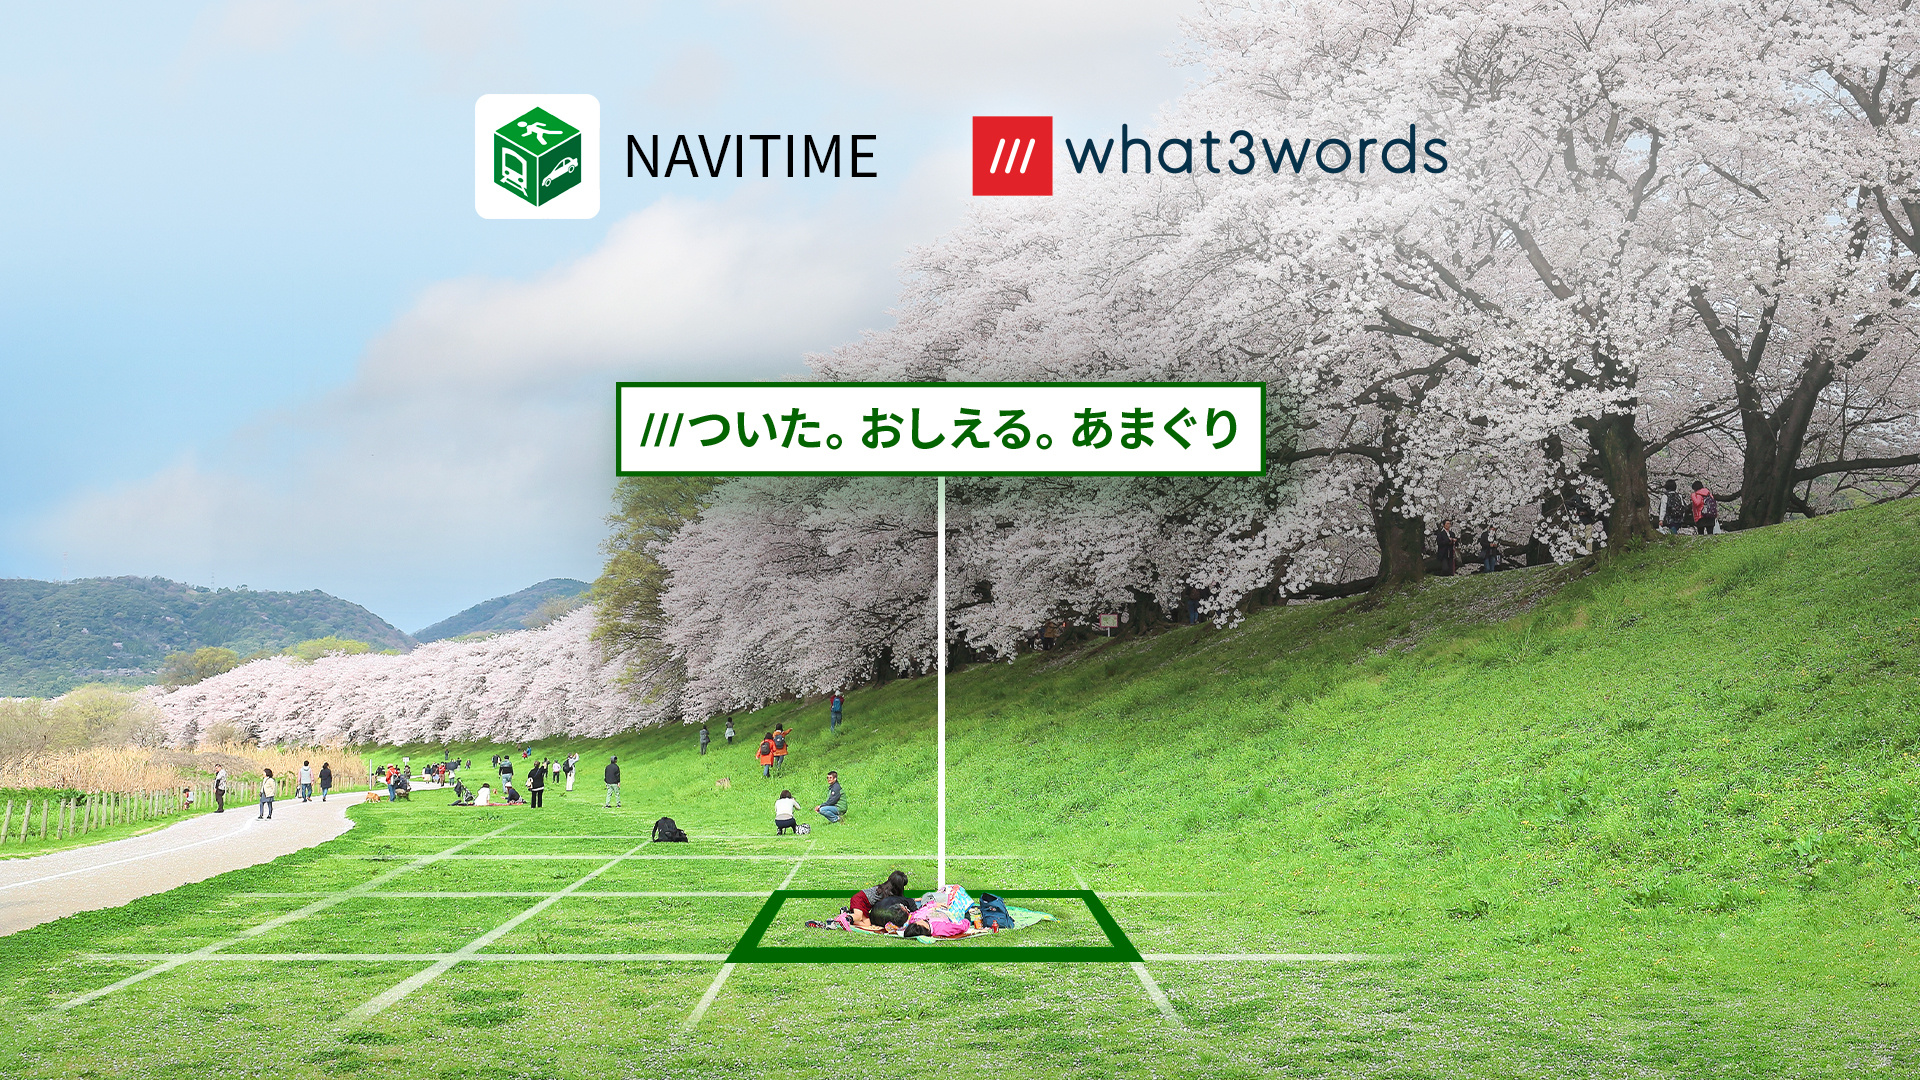 11900-what3words-Navitime-co-branded-announcement-Cherry_JP_16x9 (2).jpg